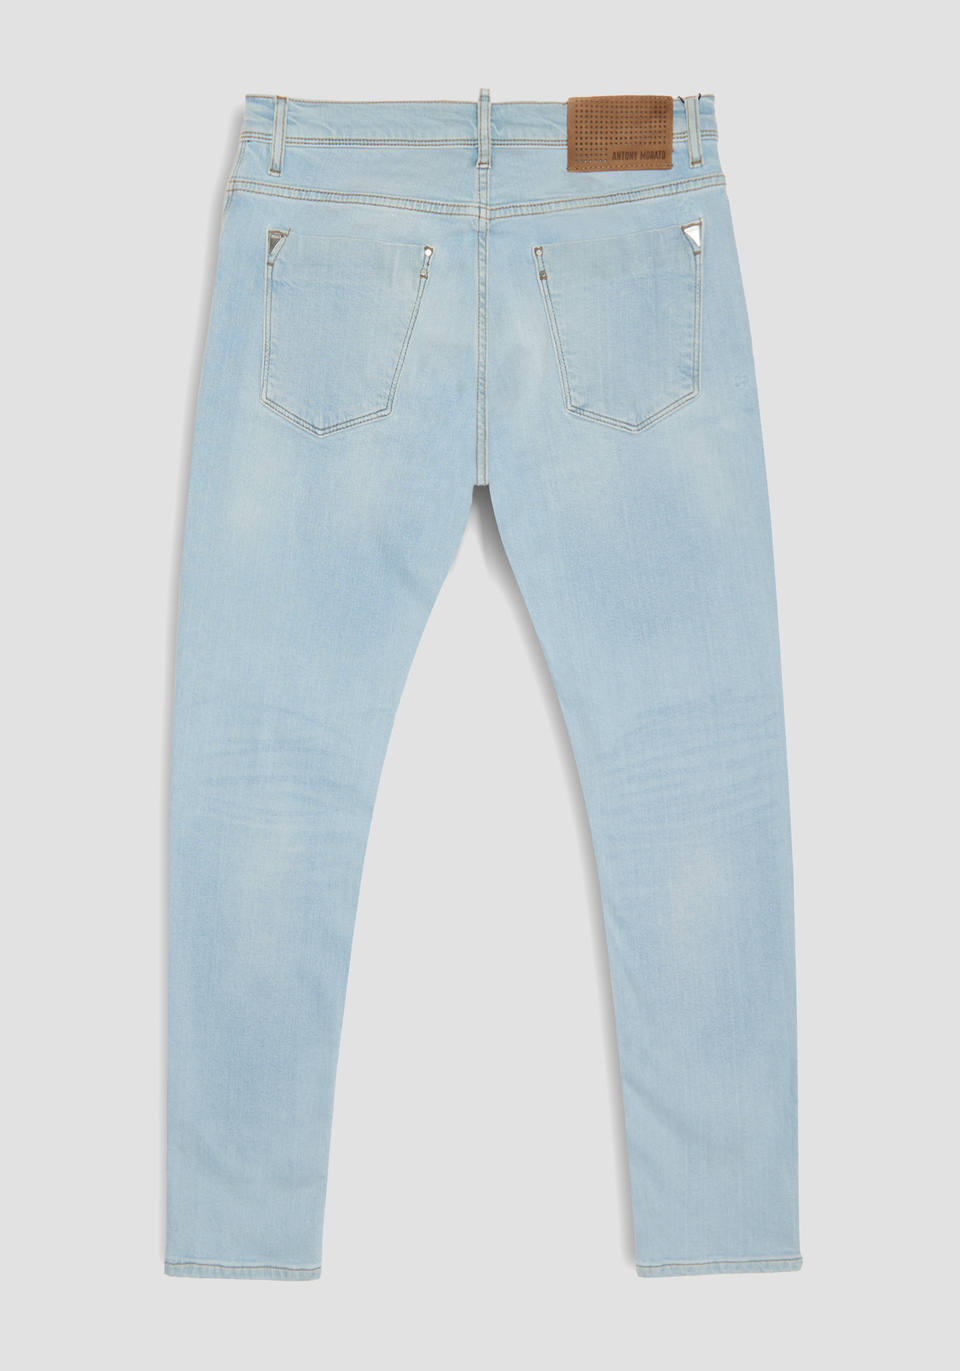 CARROT-FIT “KENNY” JEANS IN STRETCHY DENIM - Antony Morato Online Shop